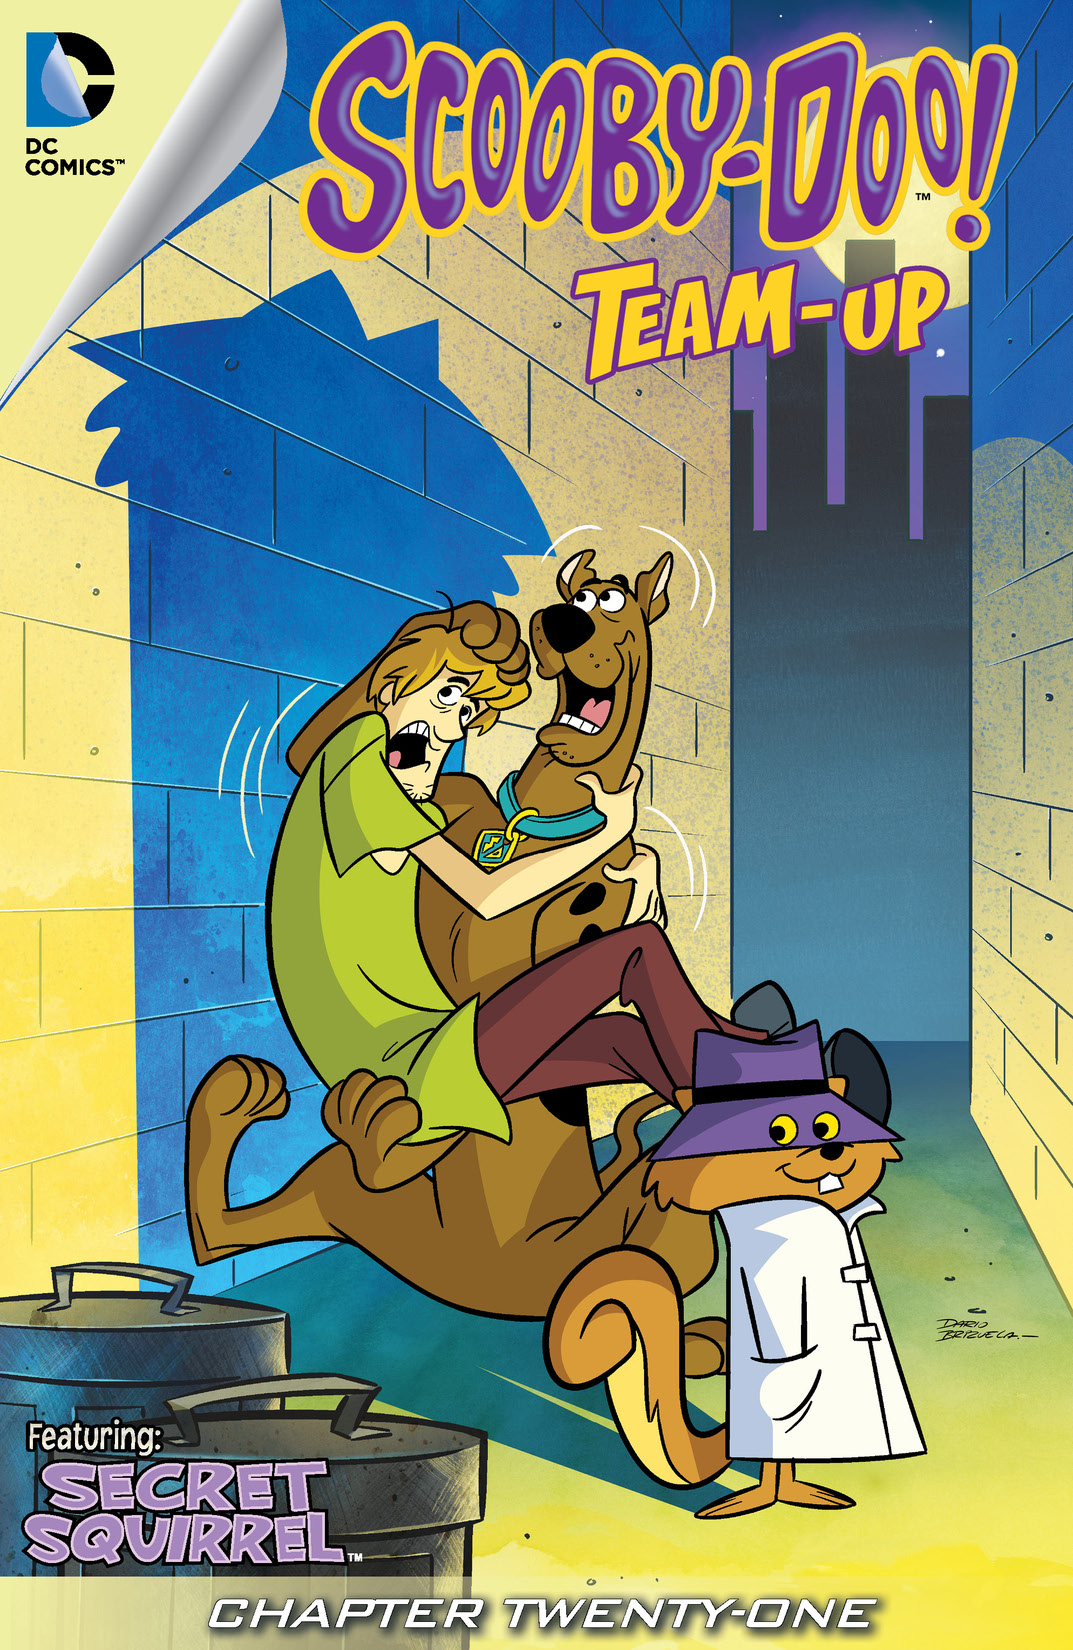 Scooby-Doo Team-Up #21 preview images